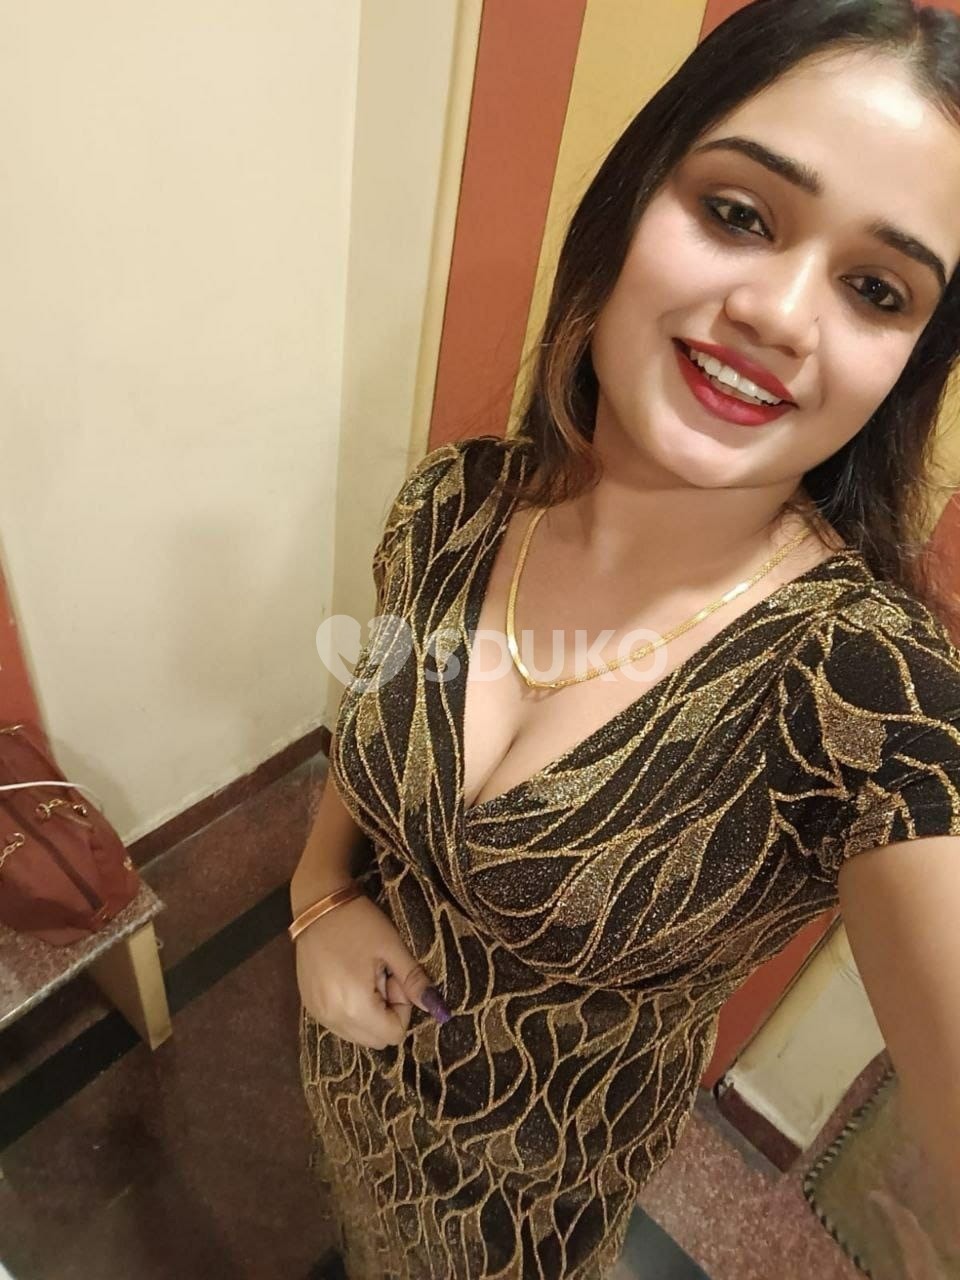 RAJKOT LOW PRICE BEST * INDEPENDENT GENUINE CALL GIRLS SERVICE ALL TYPE SERVICE UNLIMITED SHOTS